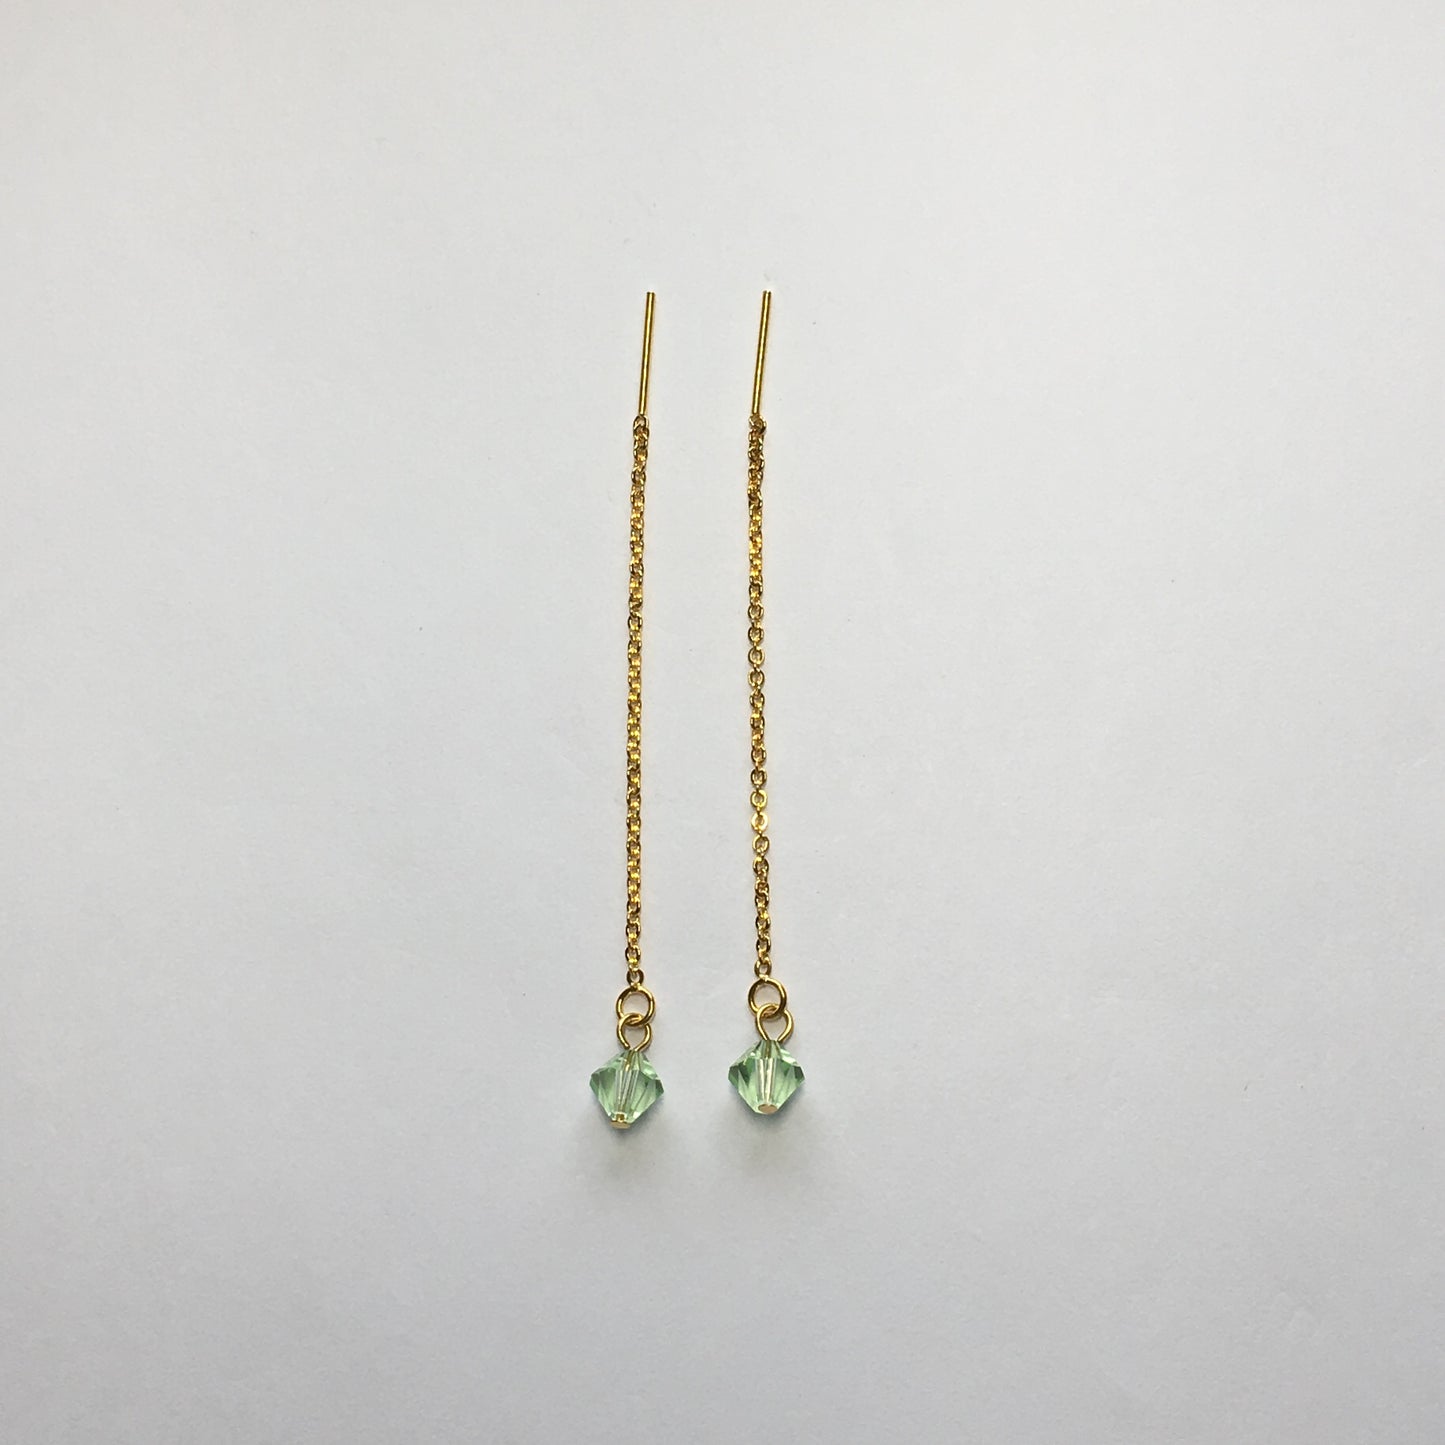 Gold Plated Post Dangle Earrings with Erinite Green Swarovski Crystal on Chain, 60 mm